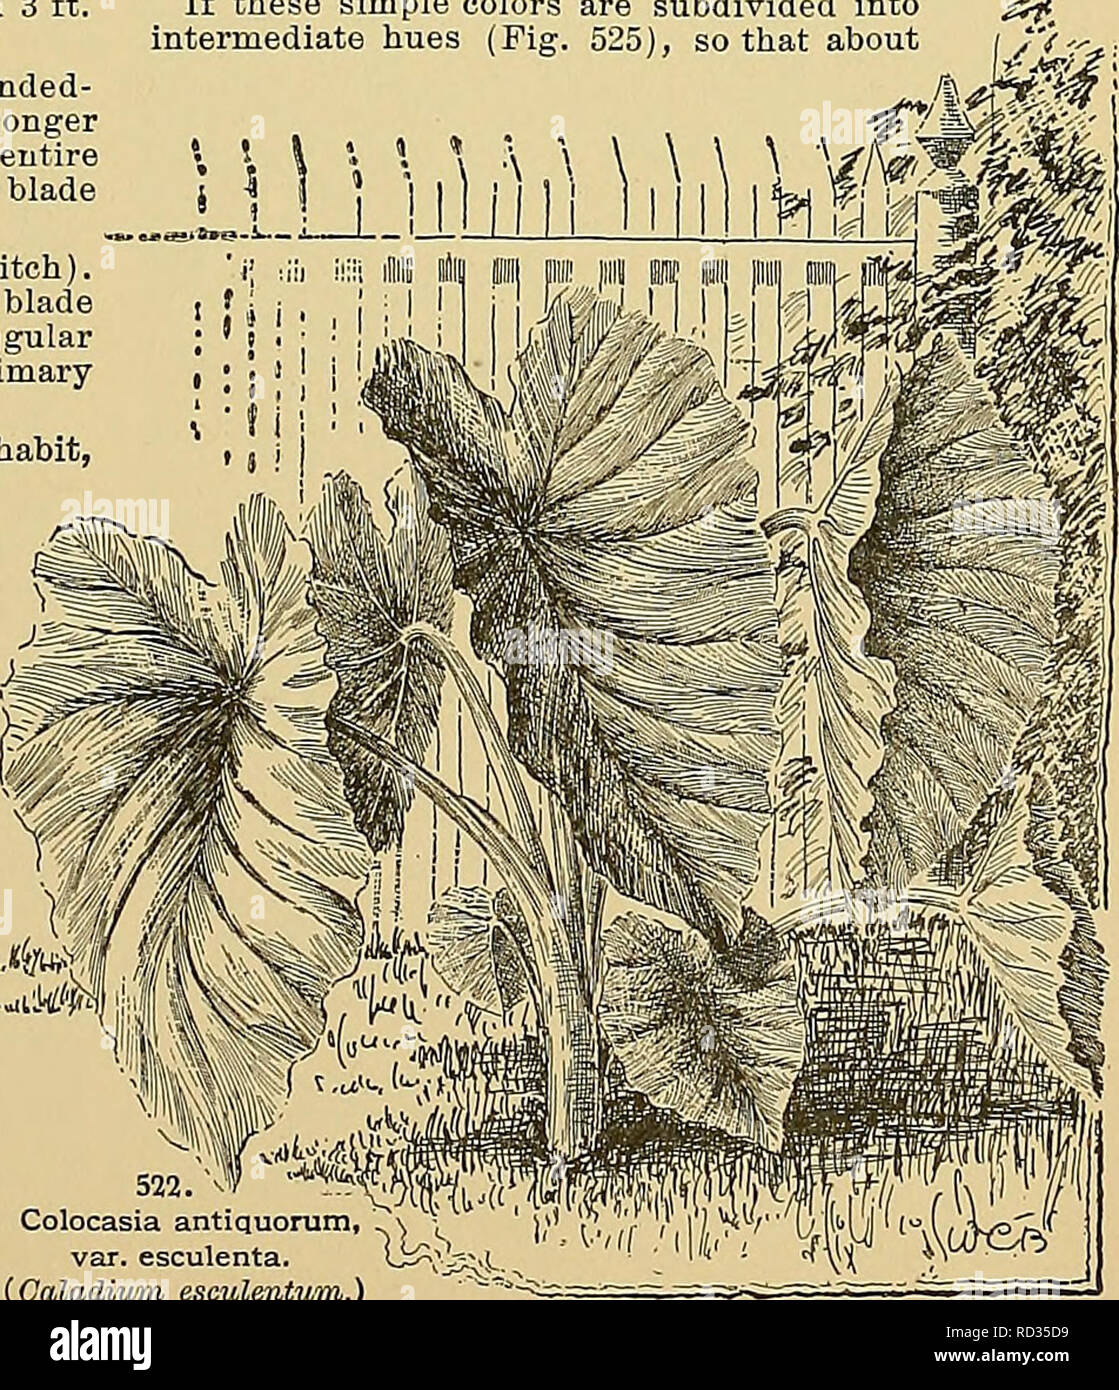 . Cyclopedia of American horticulture, comprising suggestions for cultivation of horticultural plants, descriptions of the species of fruits, vegetables, flowers, and ornamental plants sold in the United States and Canada, together with geographical and biographical sketches. Gardening. COLLOMIA COLOR 353 is applied they dart forward at riglit angles with the testa, each carrying with it a sheath o( mucus, in which it for a long time remains enveloped in a membranous case.&quot; COLOCASIA (oldGreek substantive name). Arbidece. Perennial herbs with cordate-peltate Ivs., which are often handsome Stock Photo